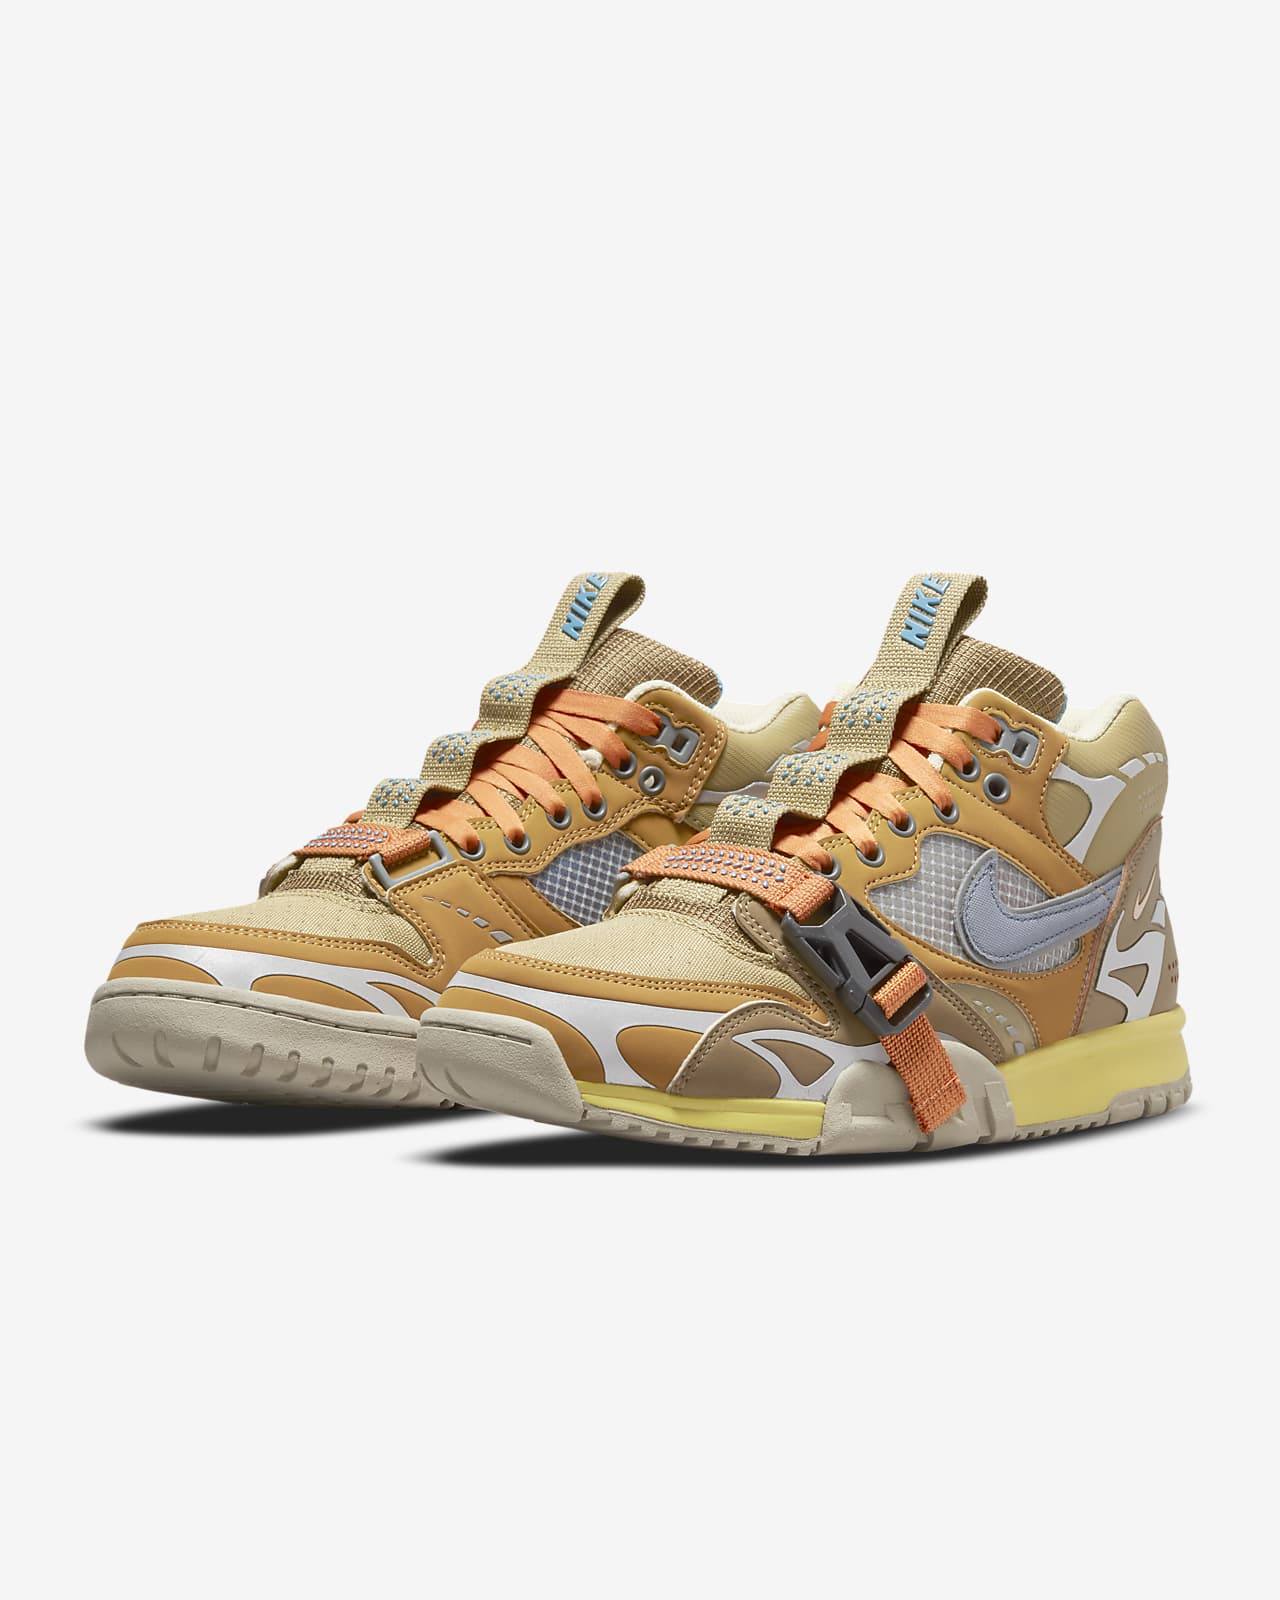 Nike Air Trainer 1 SP Men's Shoes. Nike ID